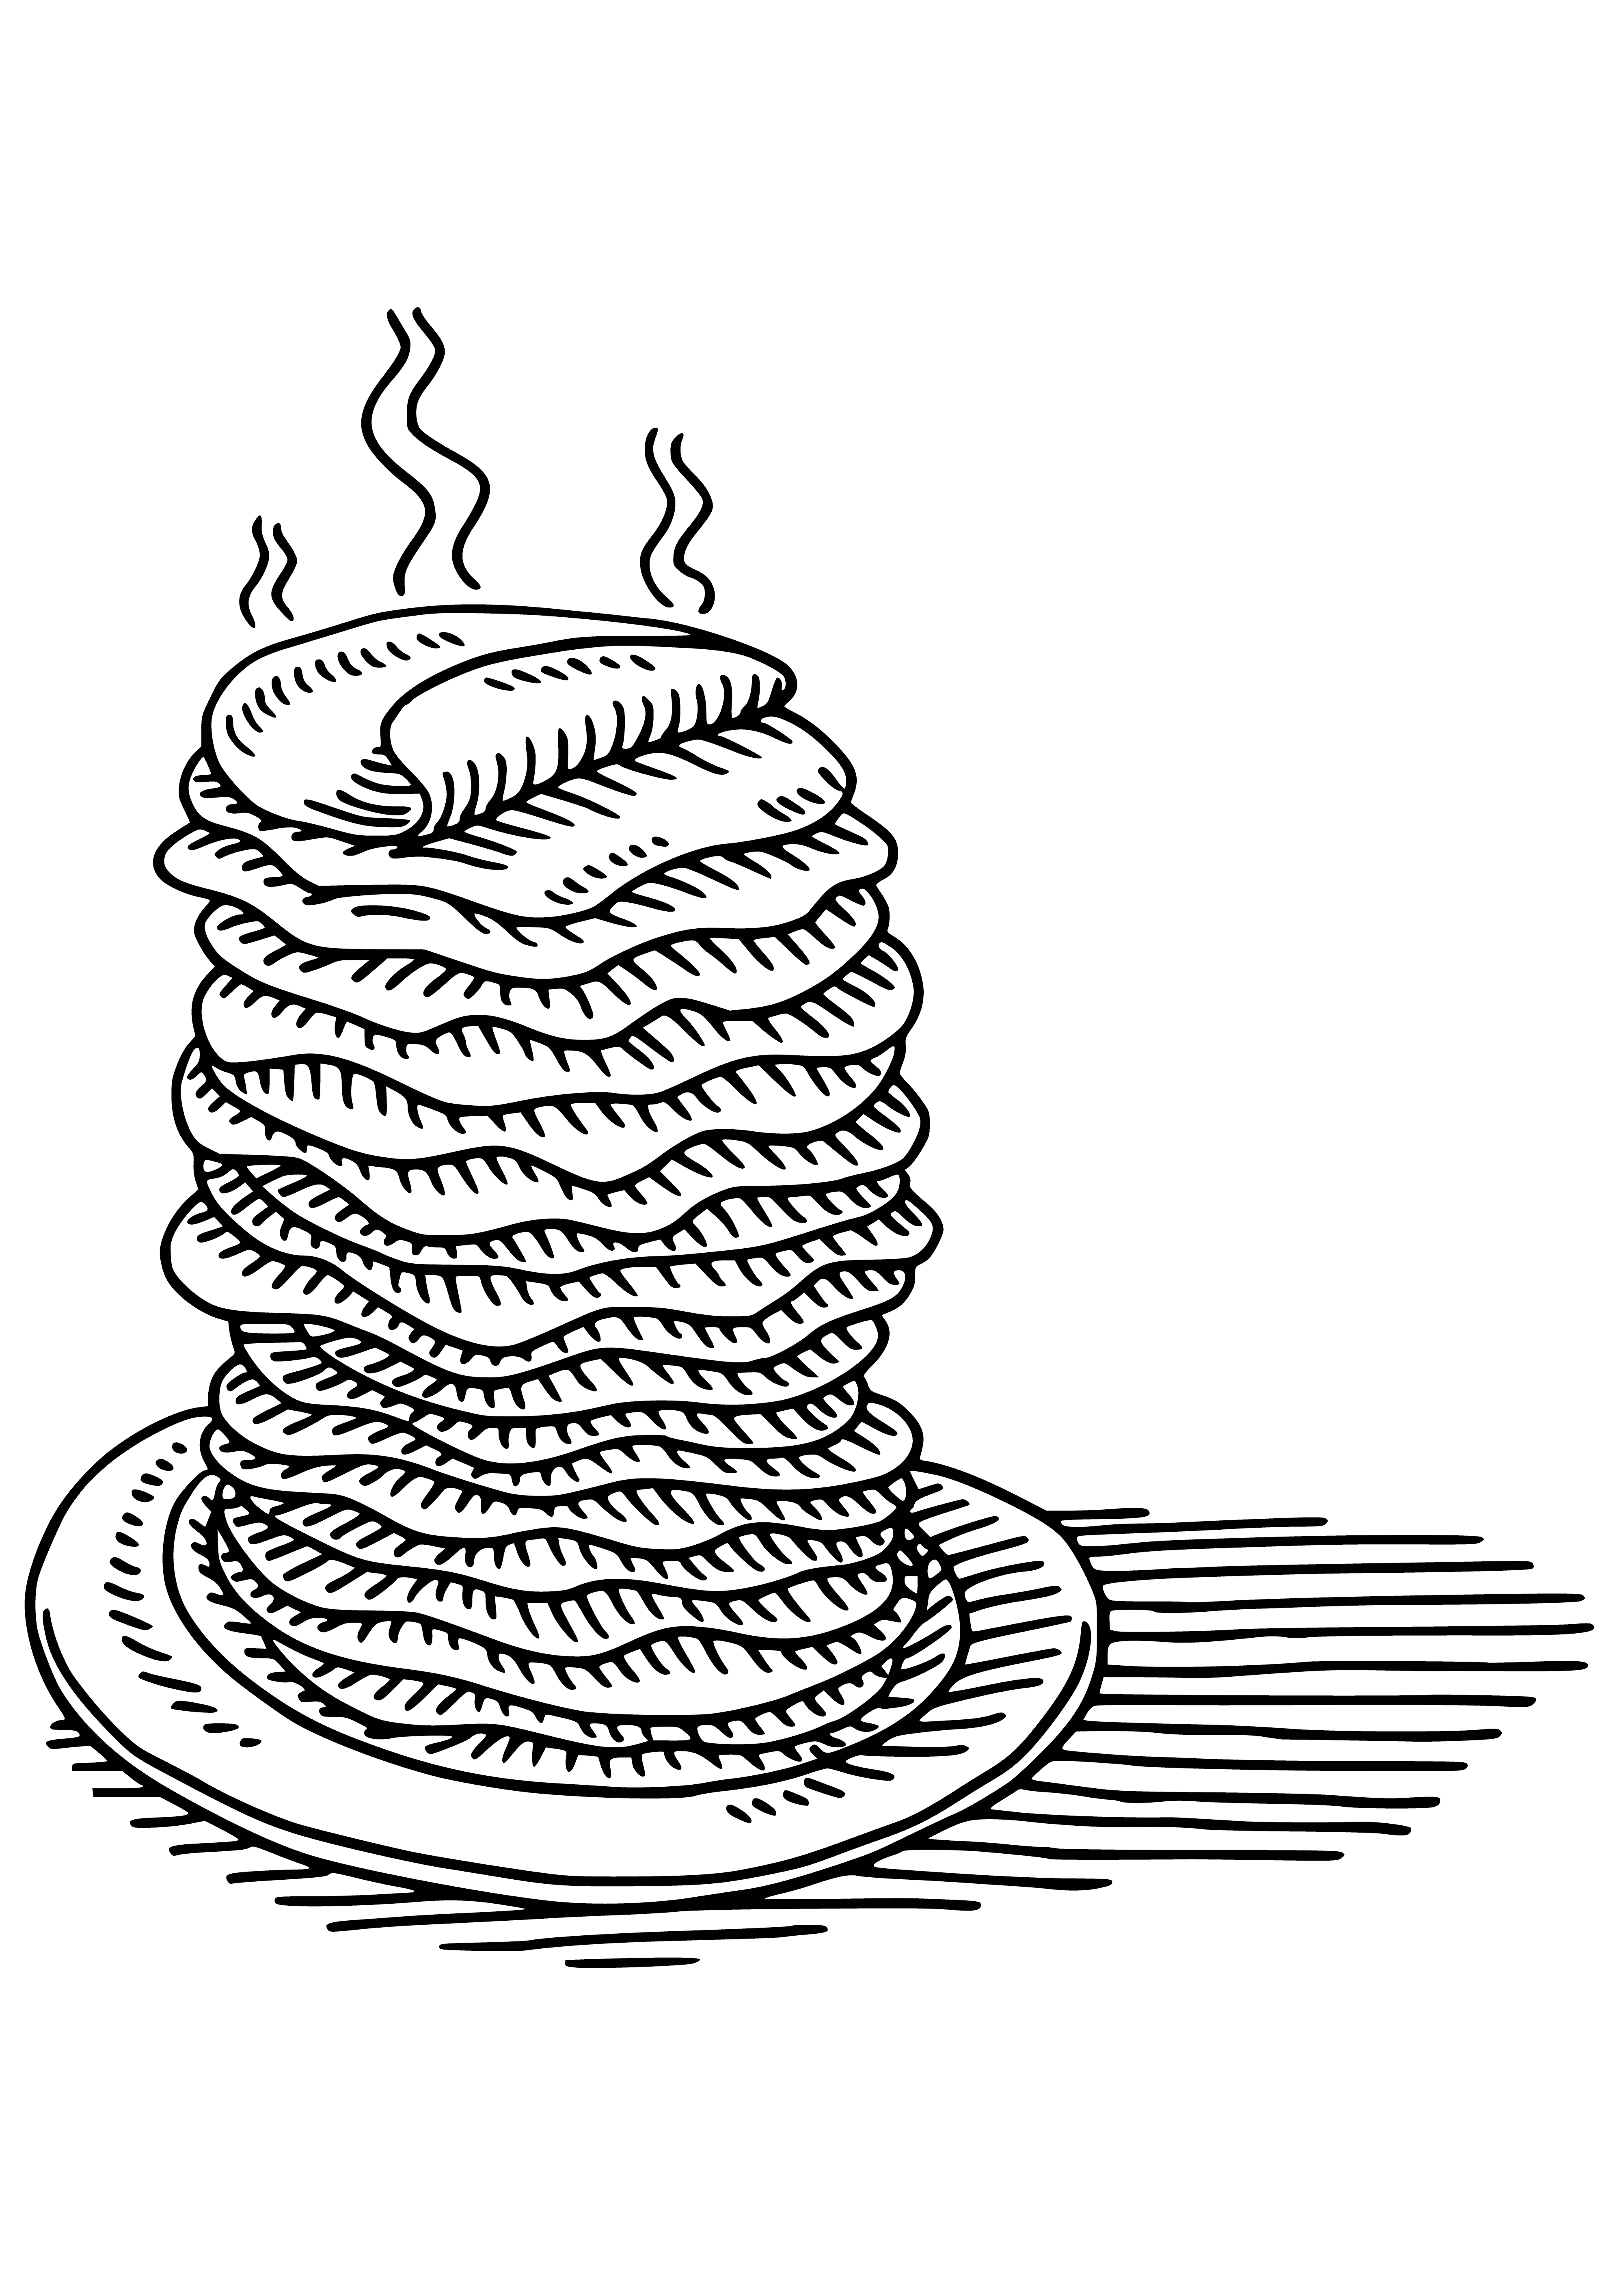 coloring page: Coloring page: hot stack of golden-brown pancakes with syrup & fork sticking out. #ColorfulPancakes